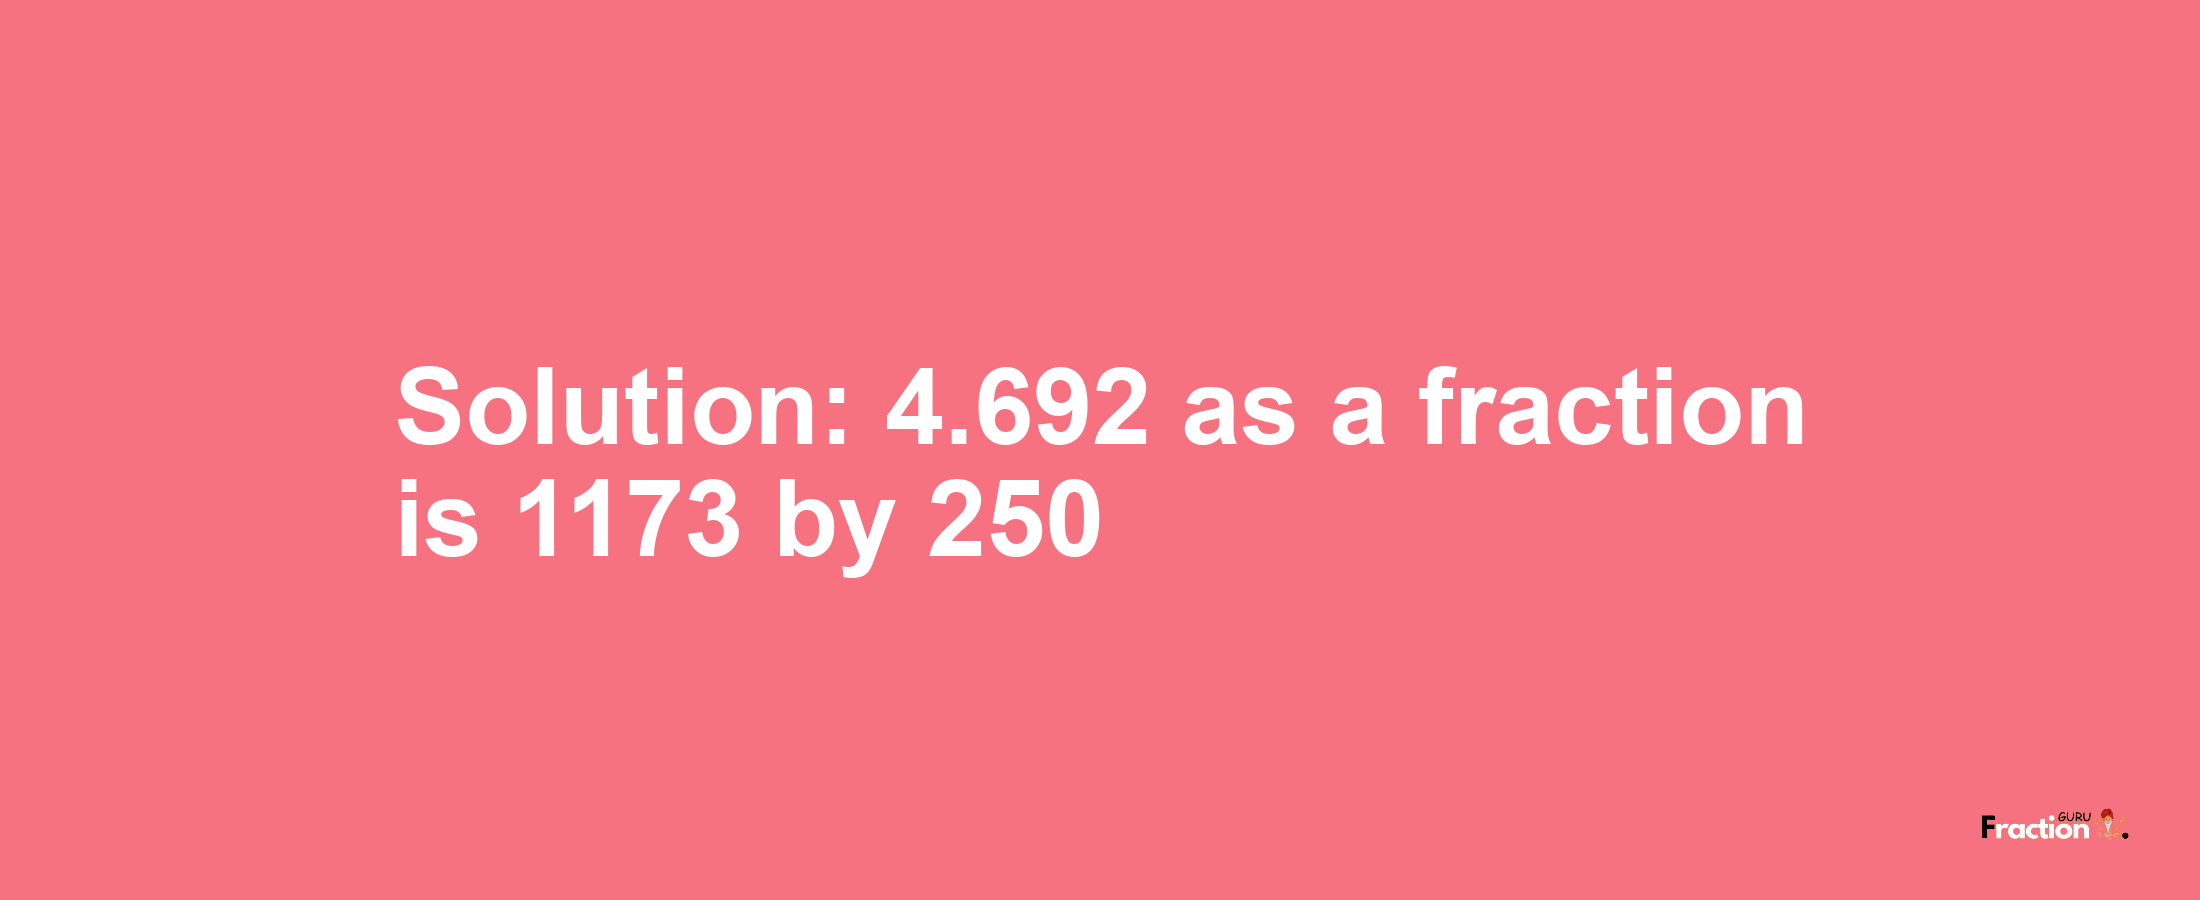 Solution:4.692 as a fraction is 1173/250